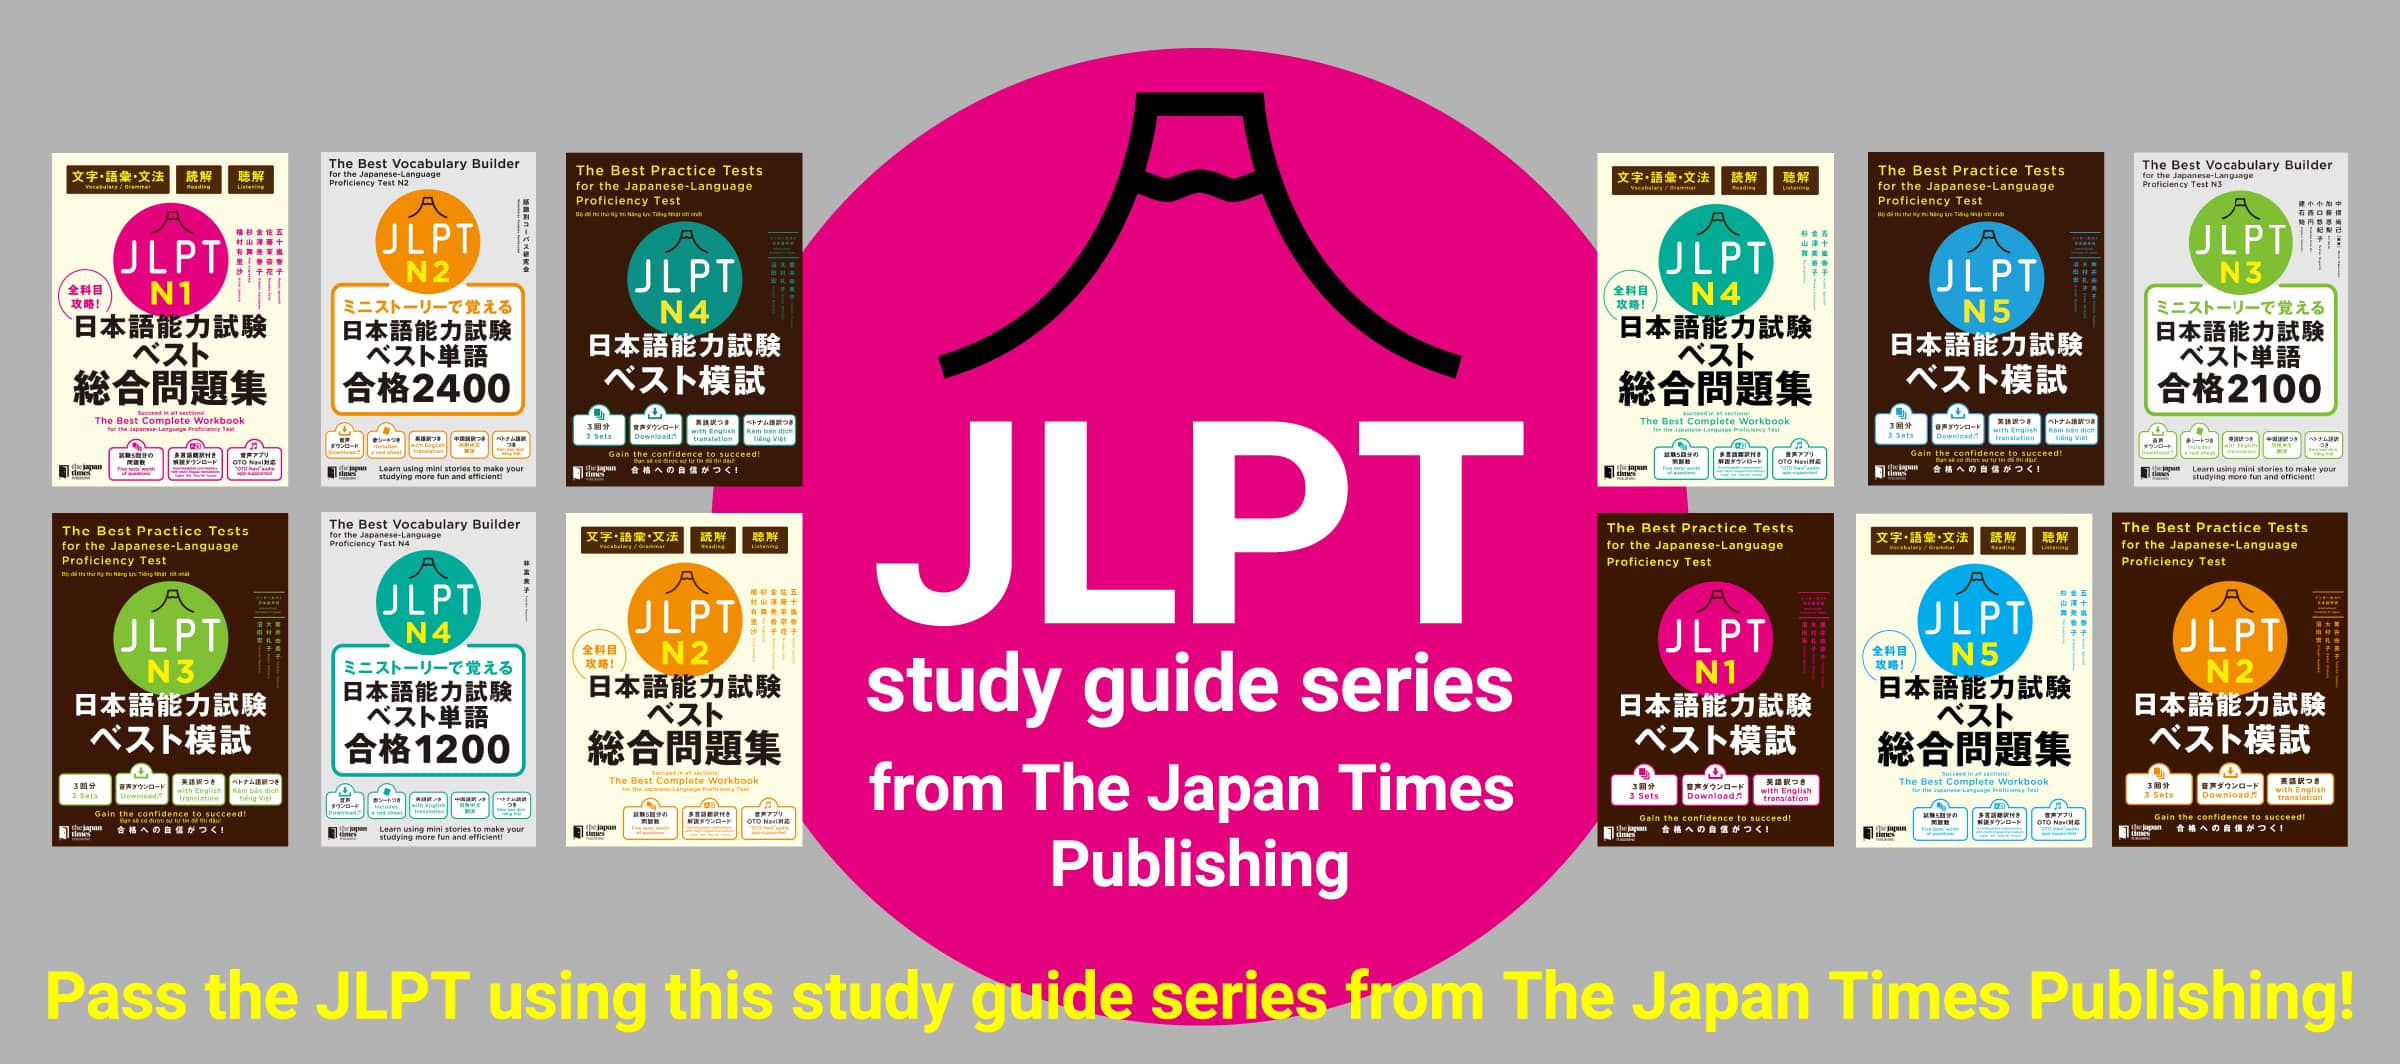 JLPT study guide series from The Japan Times Publishing